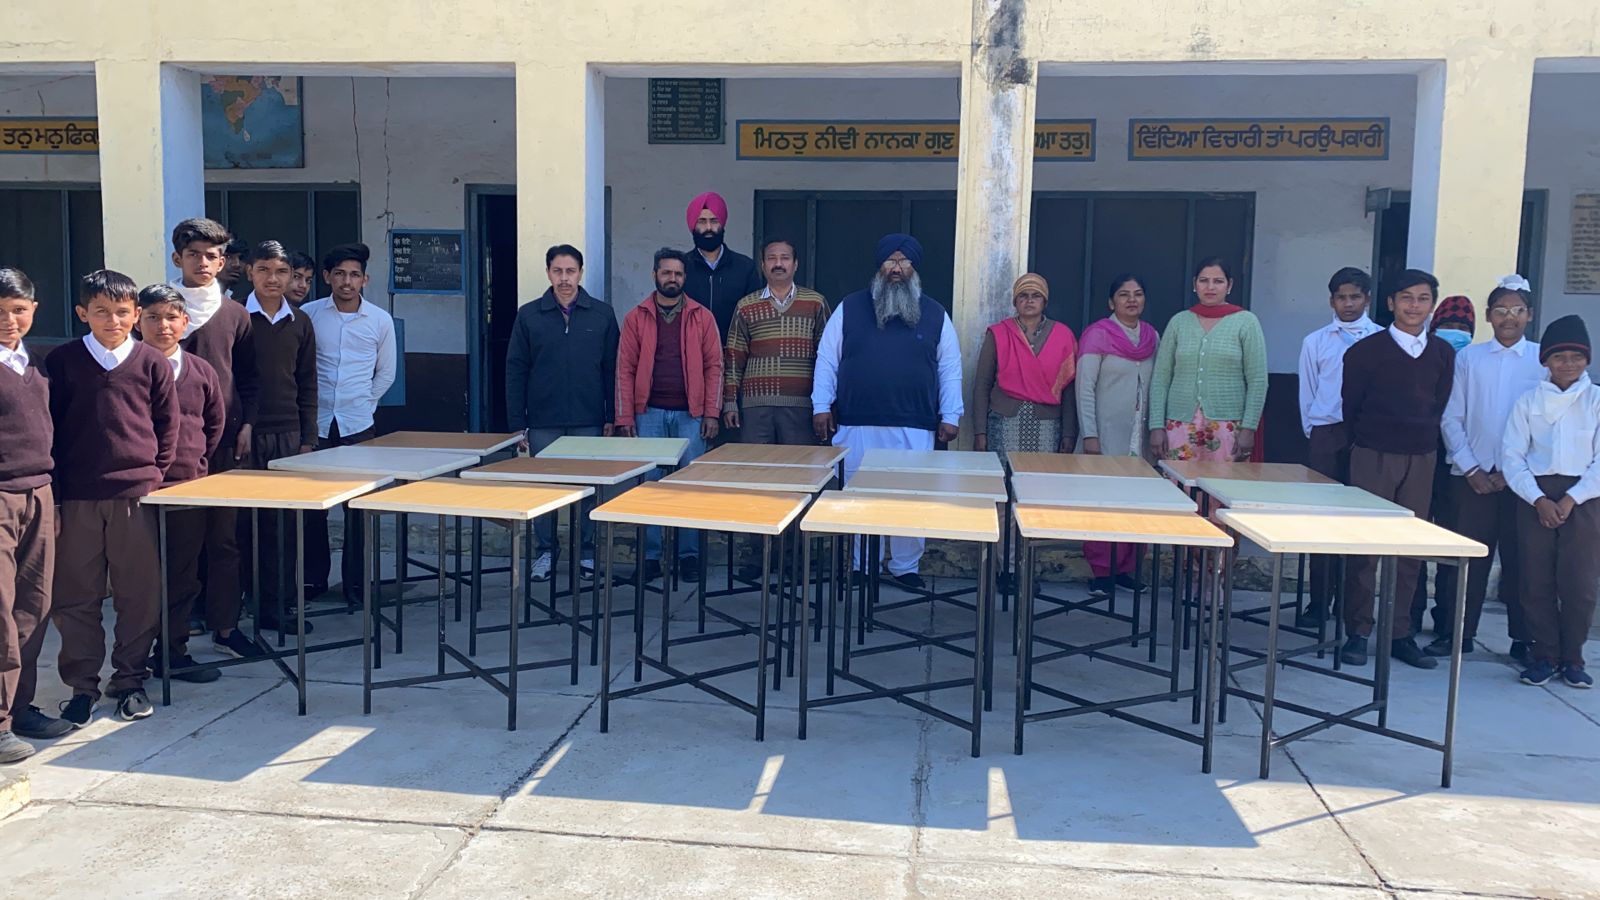 Folding Tables Donated